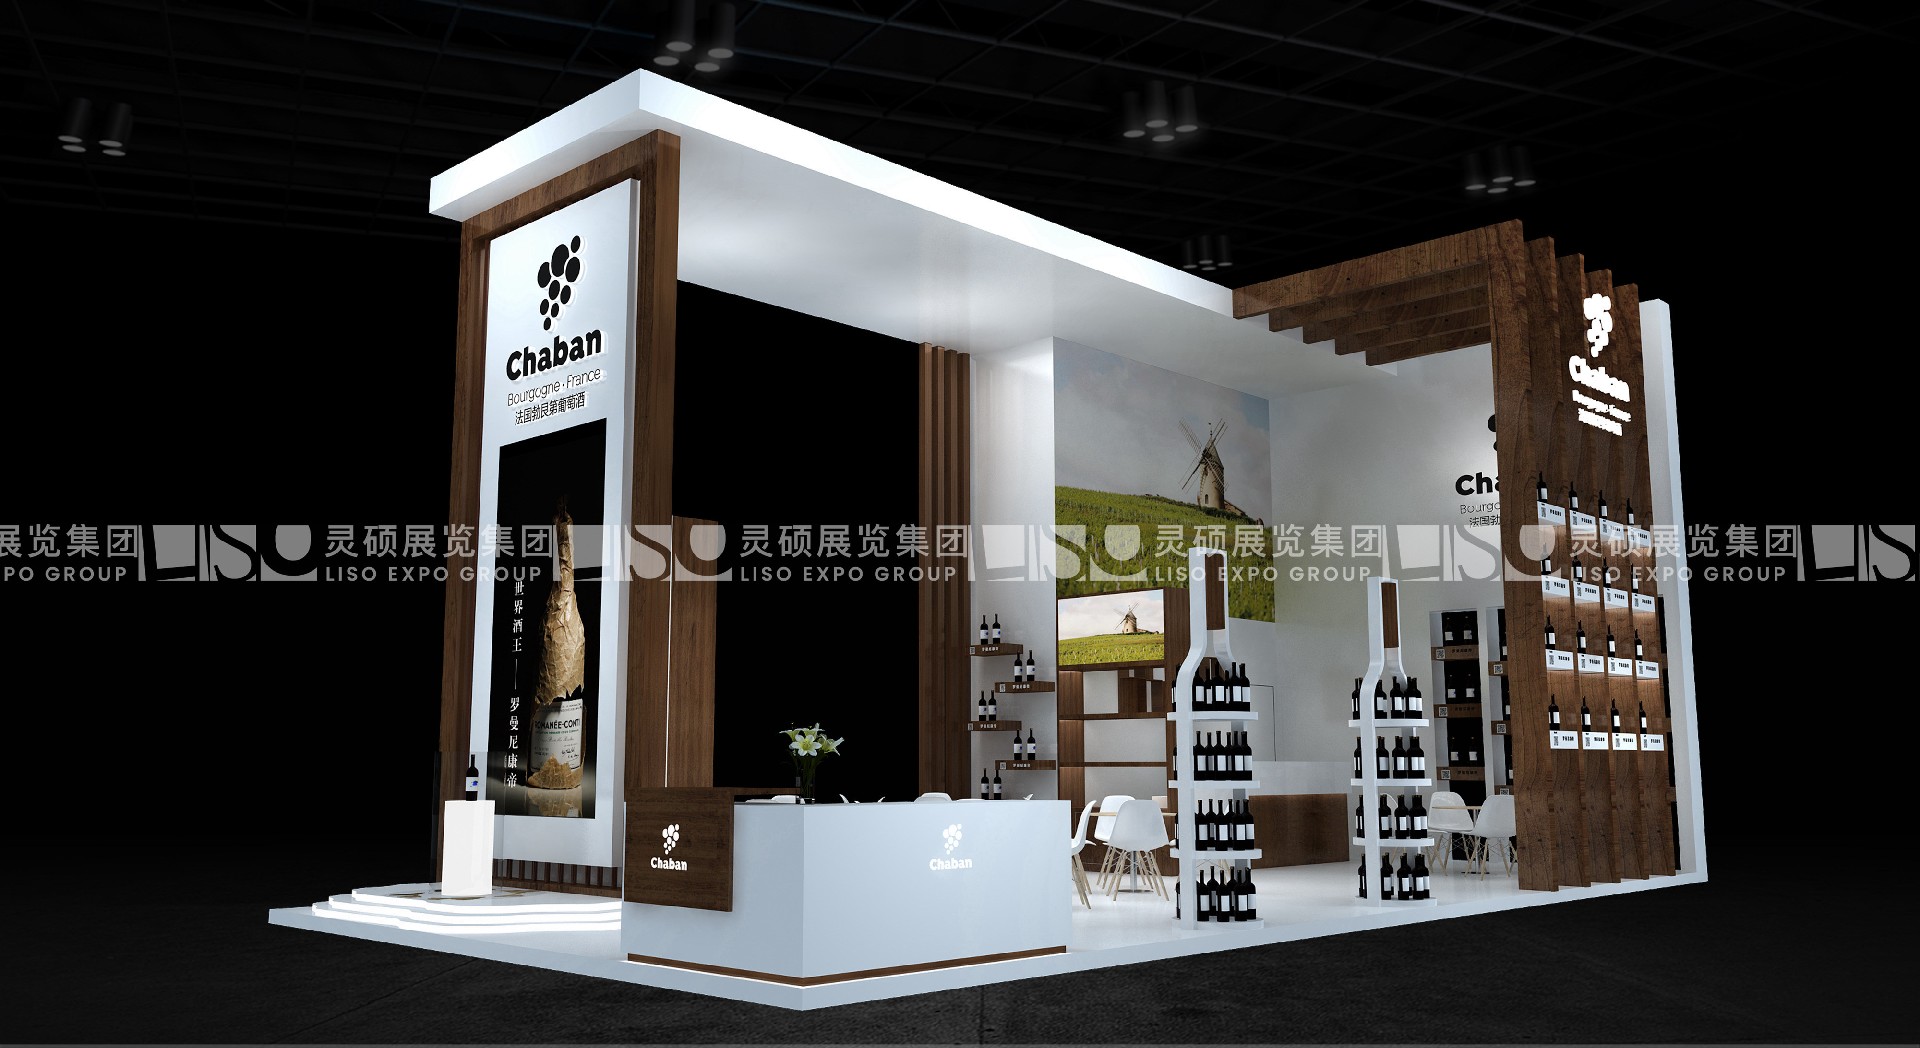 Xiabang-CIIE Booth Design and Construction Case